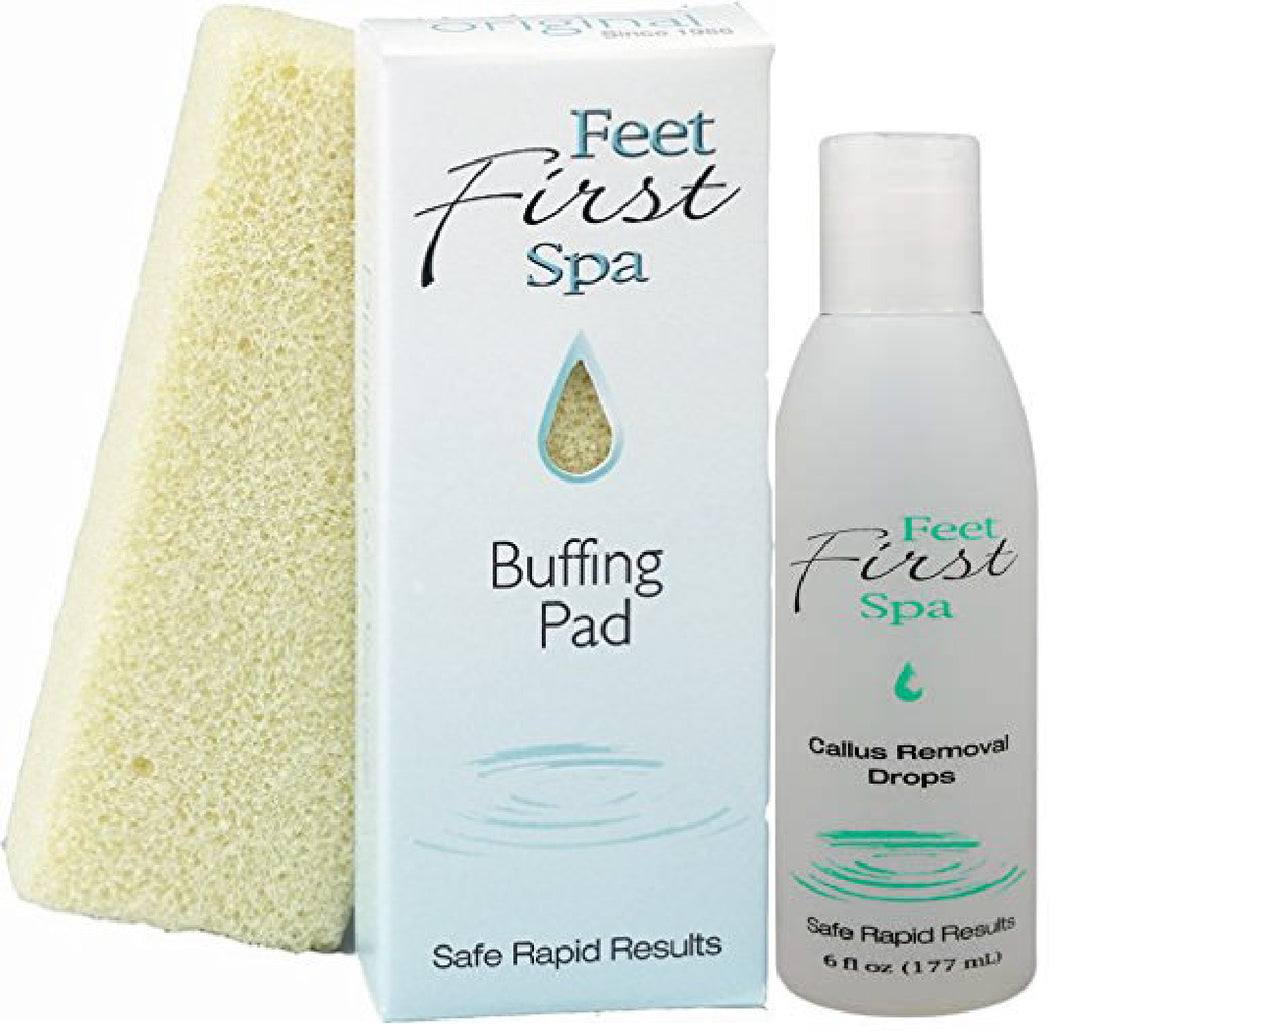 Feet First Buffing Pads with Callus Removal Drops